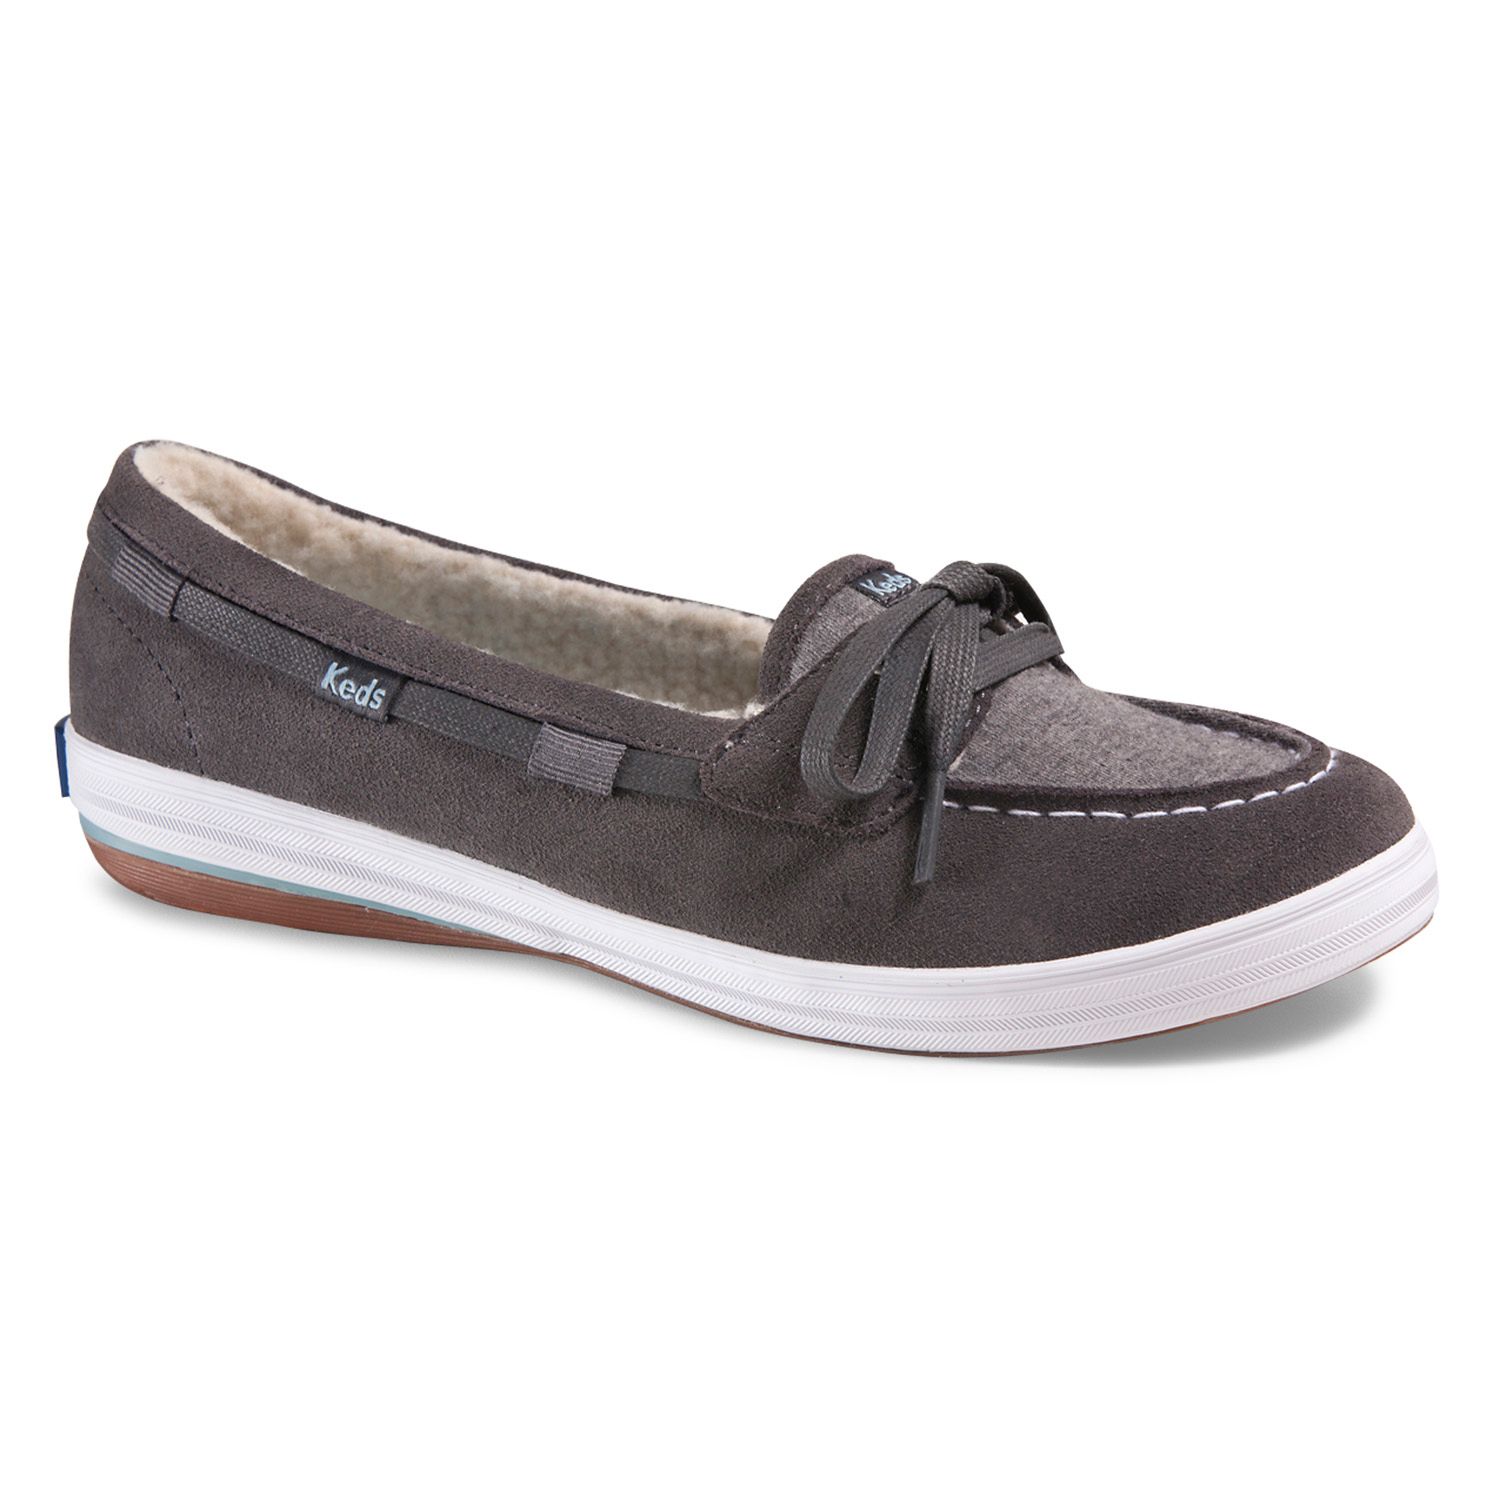 keds glimmer women's boat shoes